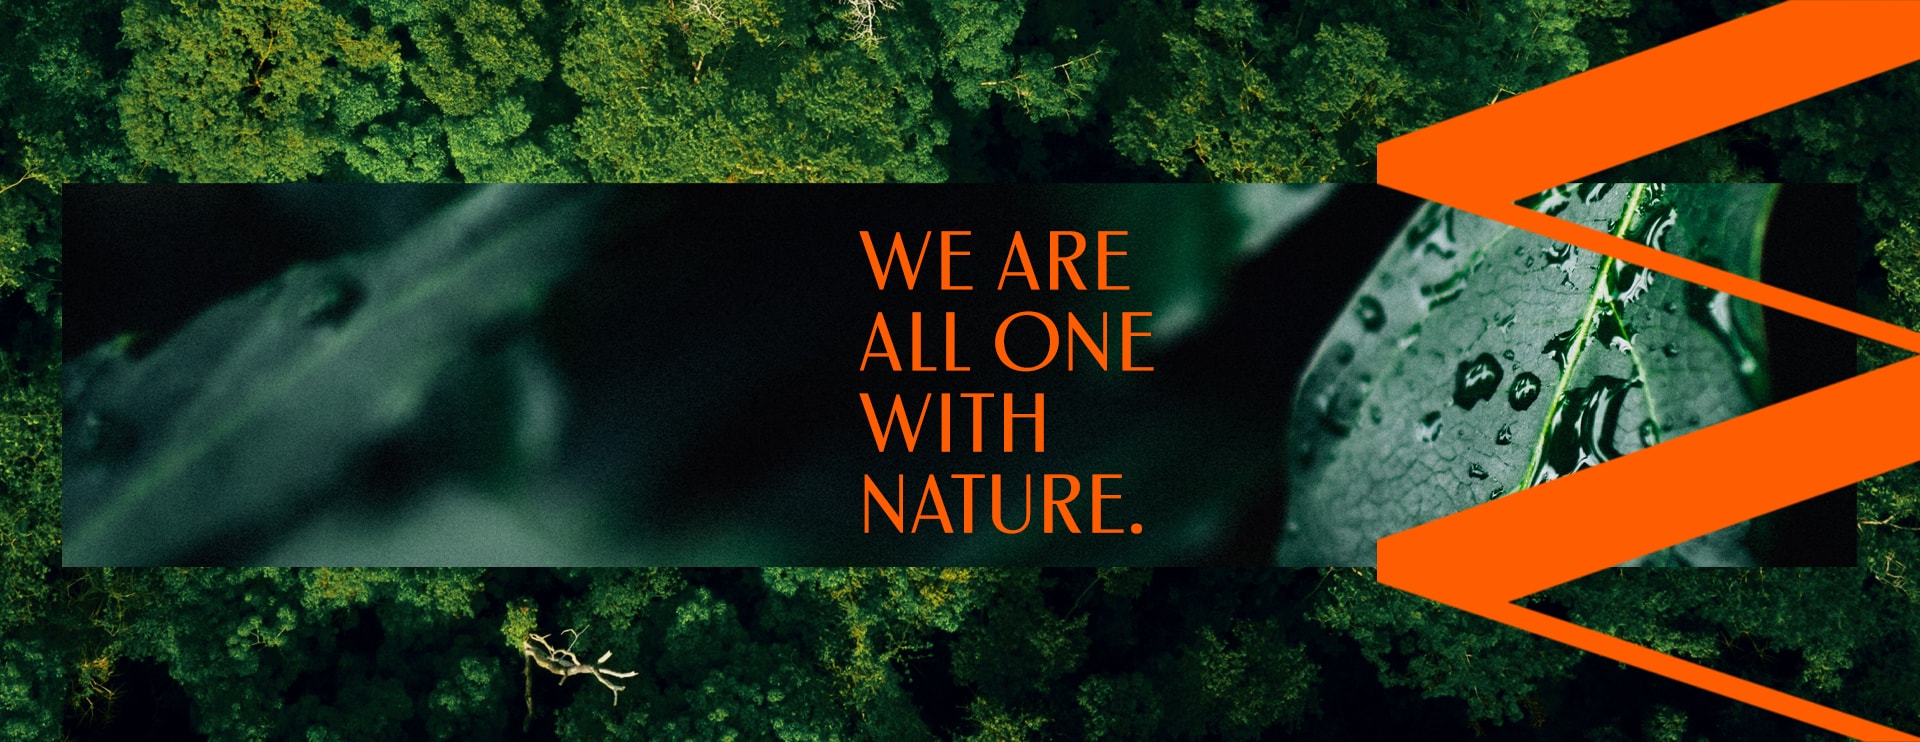 natura ekos earth day - we are one all with nature